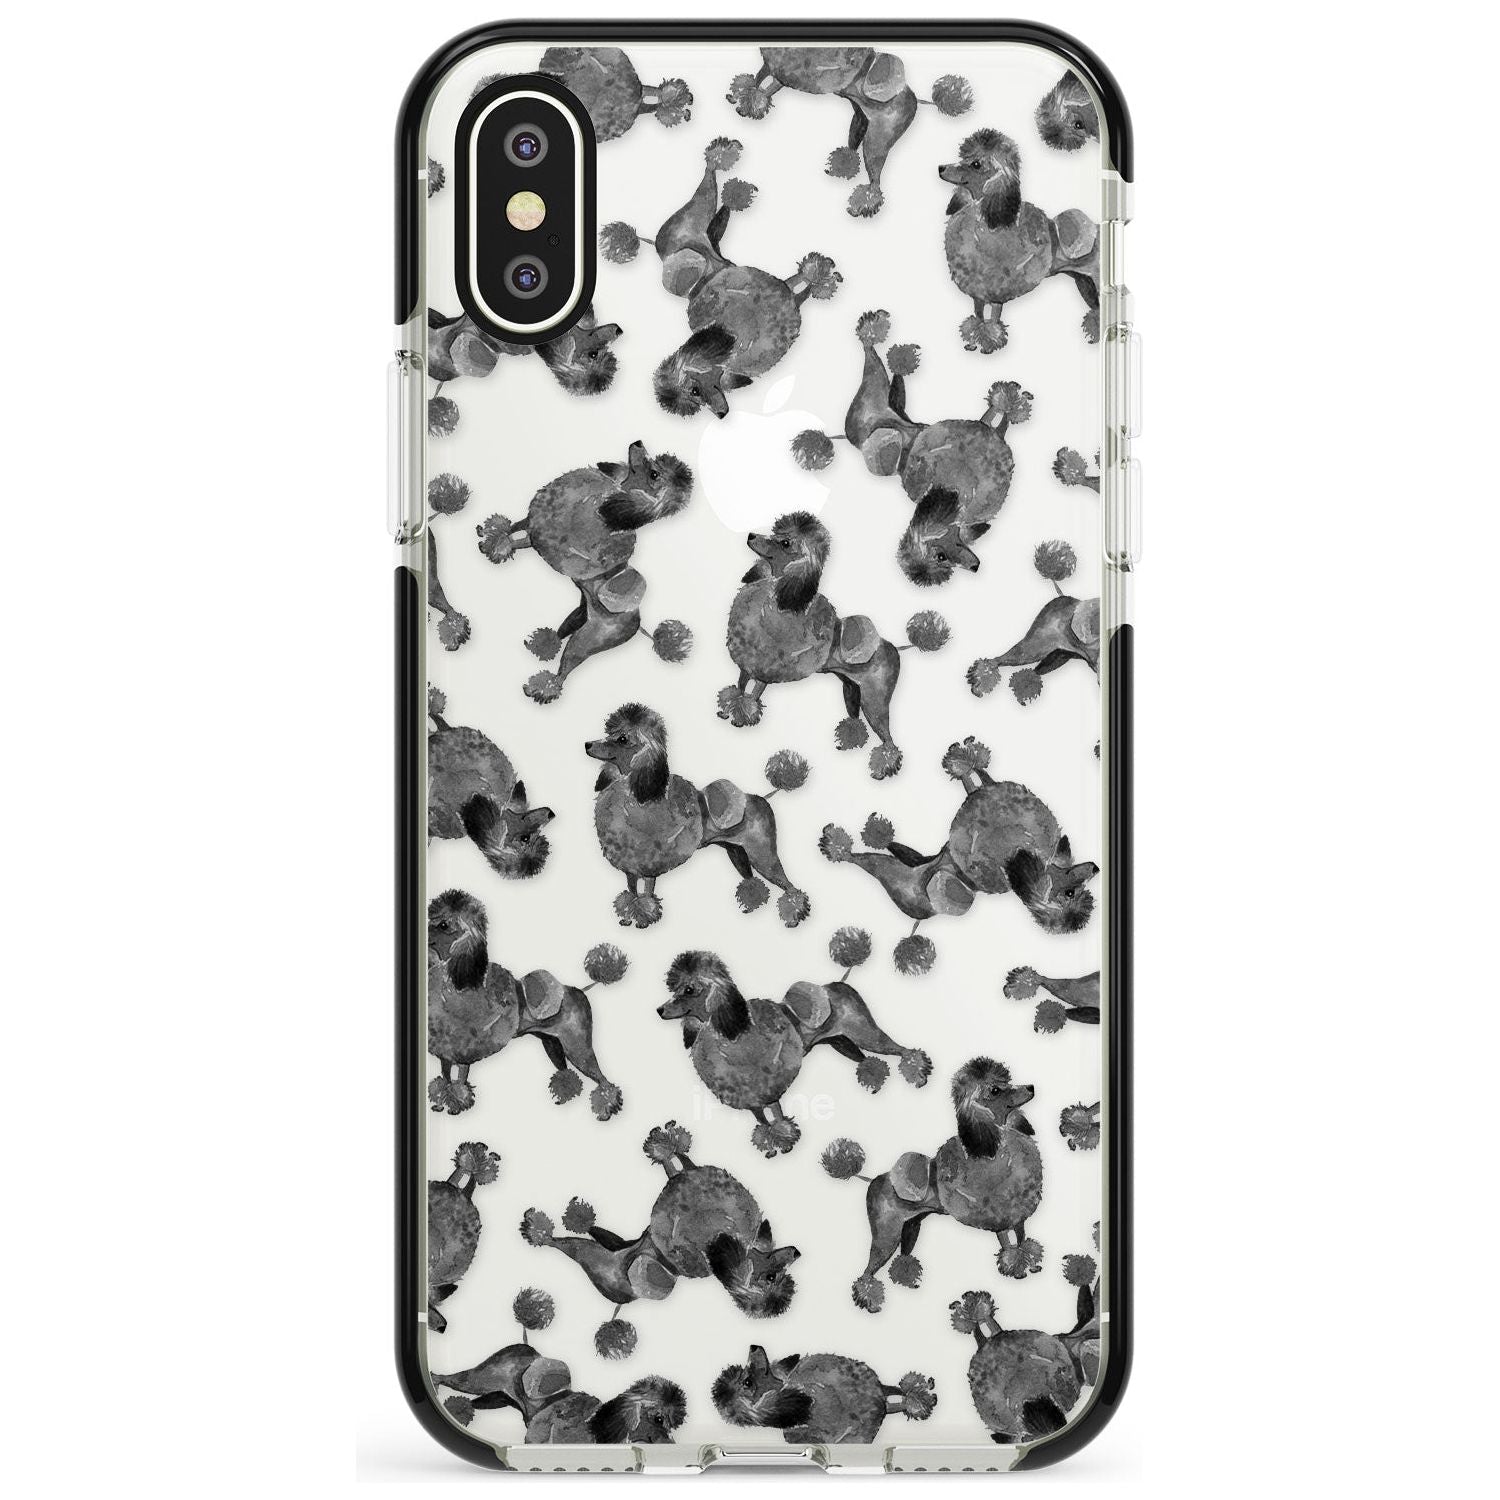 Poodle (Black) Watercolour Dog Pattern Black Impact Phone Case for iPhone X XS Max XR